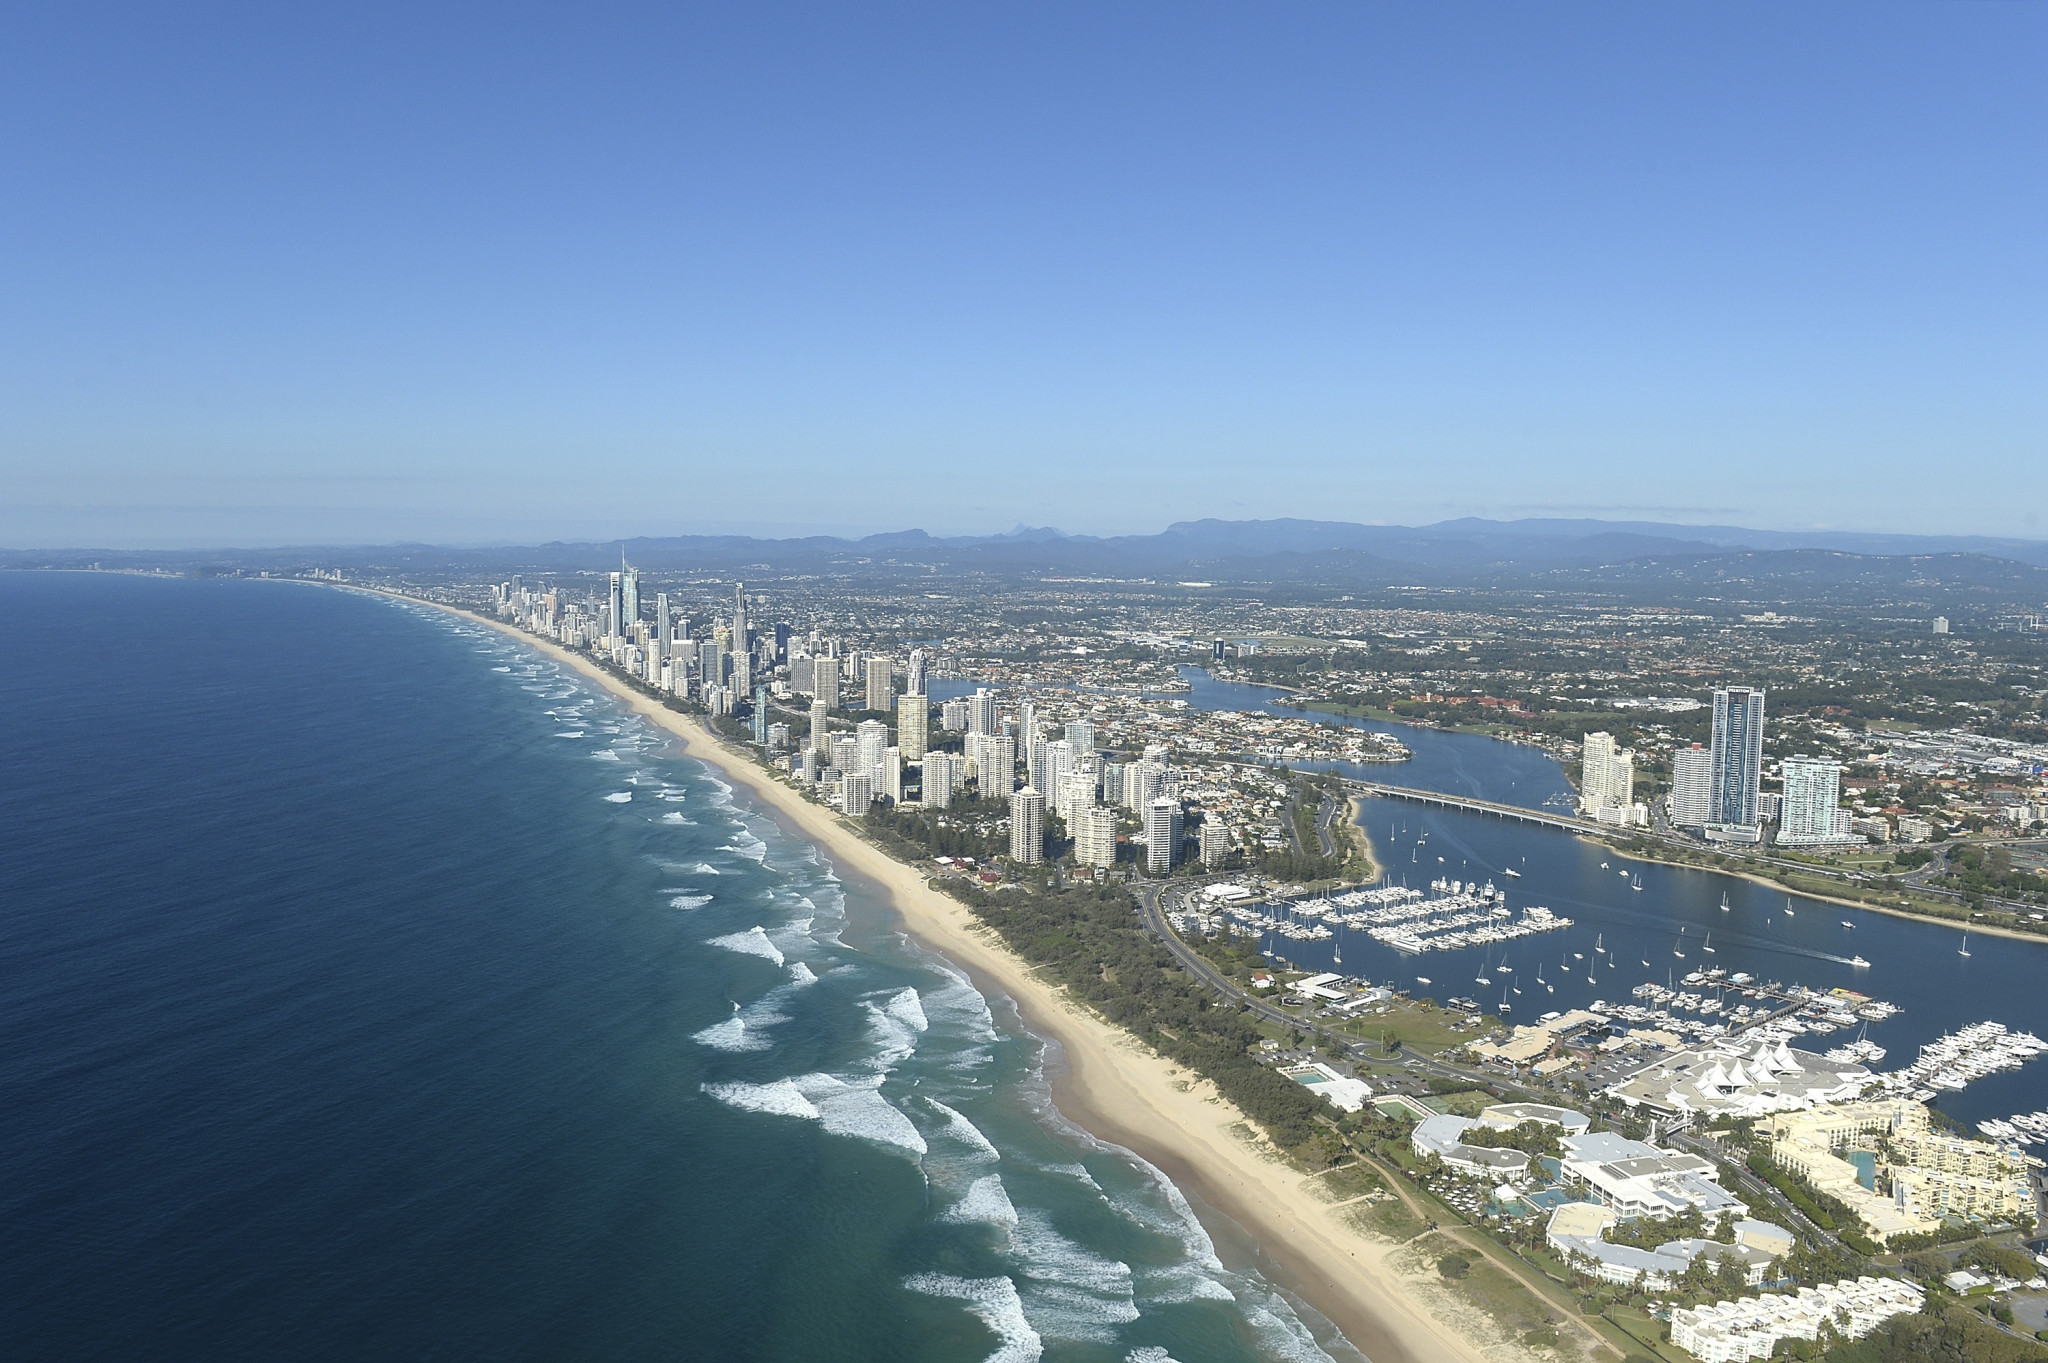 Gold Coast 2018 opens in Australia on April 4, with the beer cans promoting the event  ©Getty Images